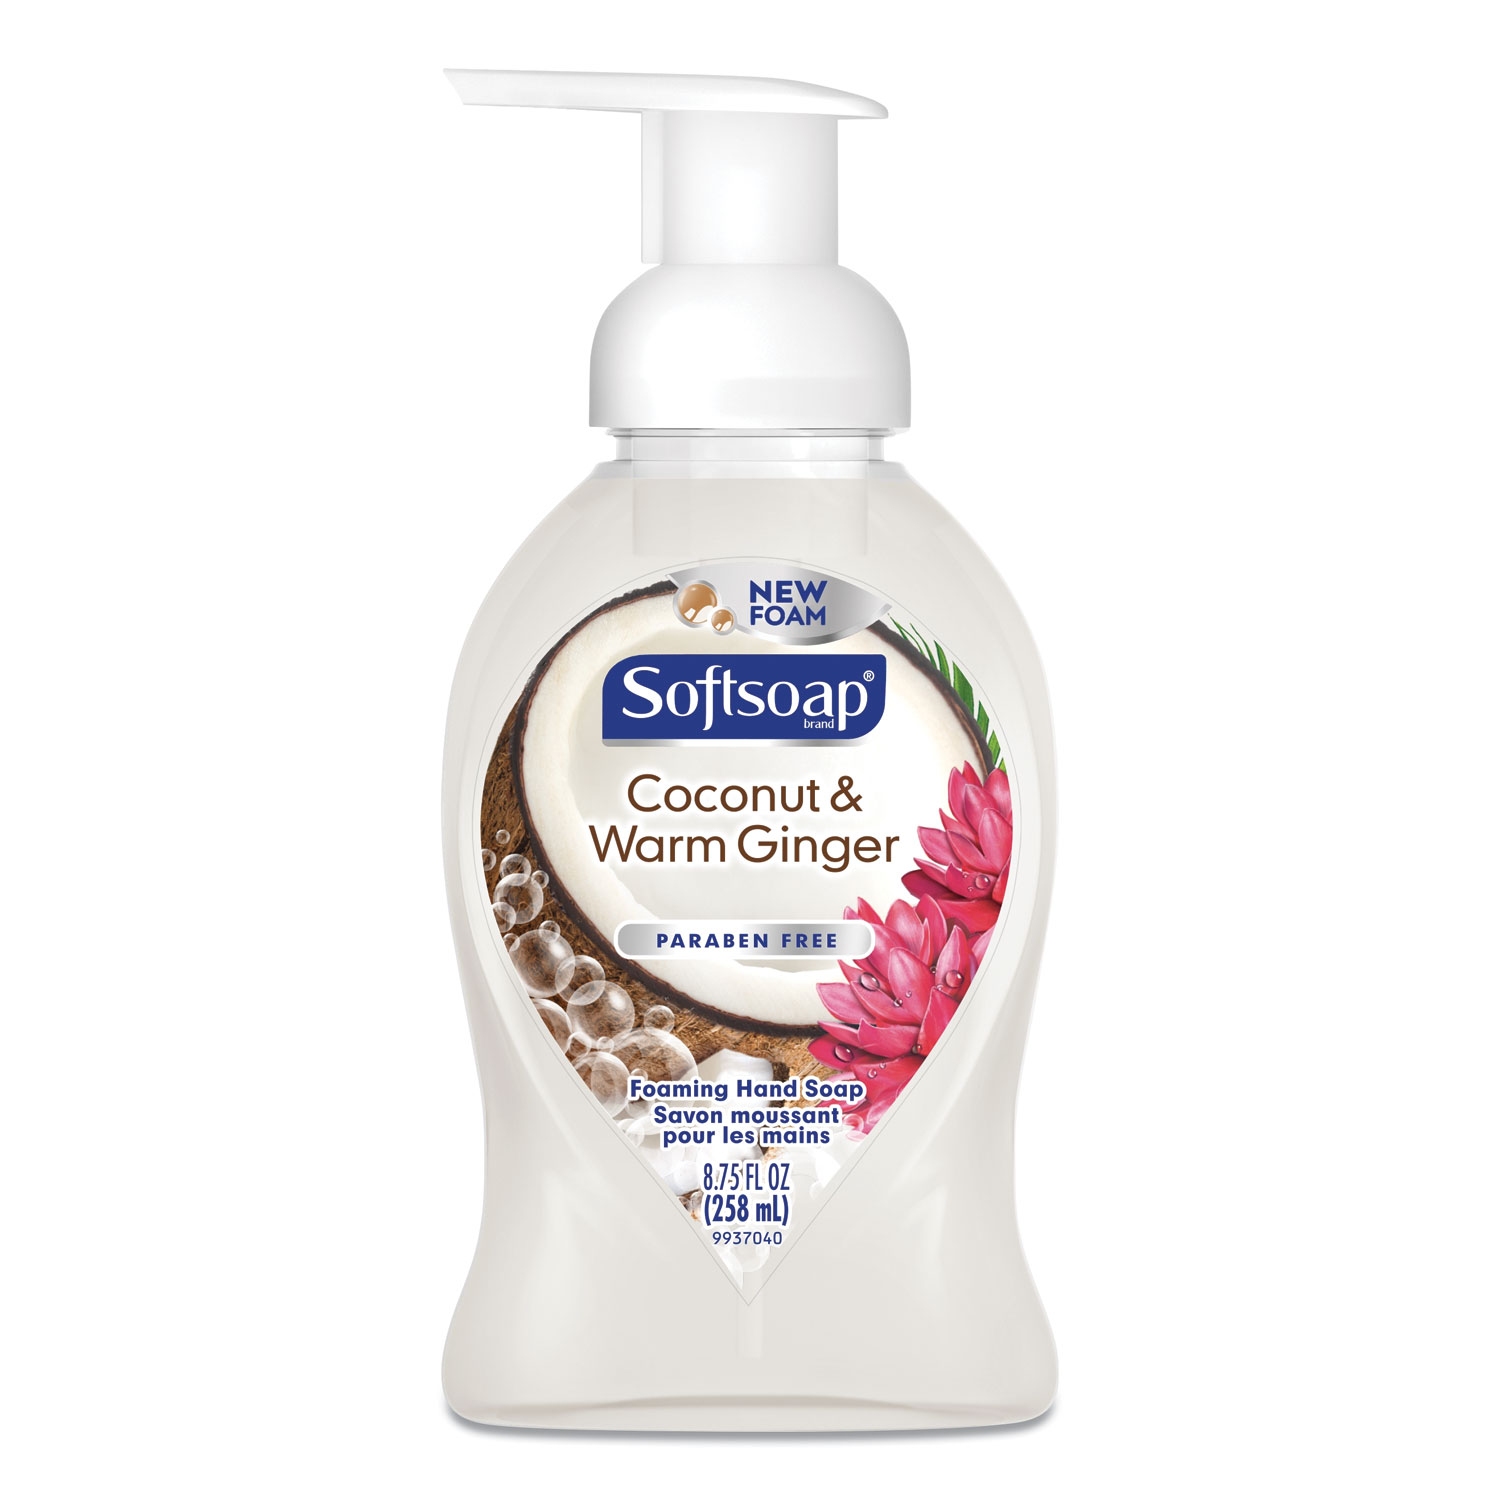  Softsoap US06310A Sensorial Foaming Hand Soap, 8.75 oz Pump Bottle, Coconut and Warm Ginger, 6/Carton (CPC96985) 